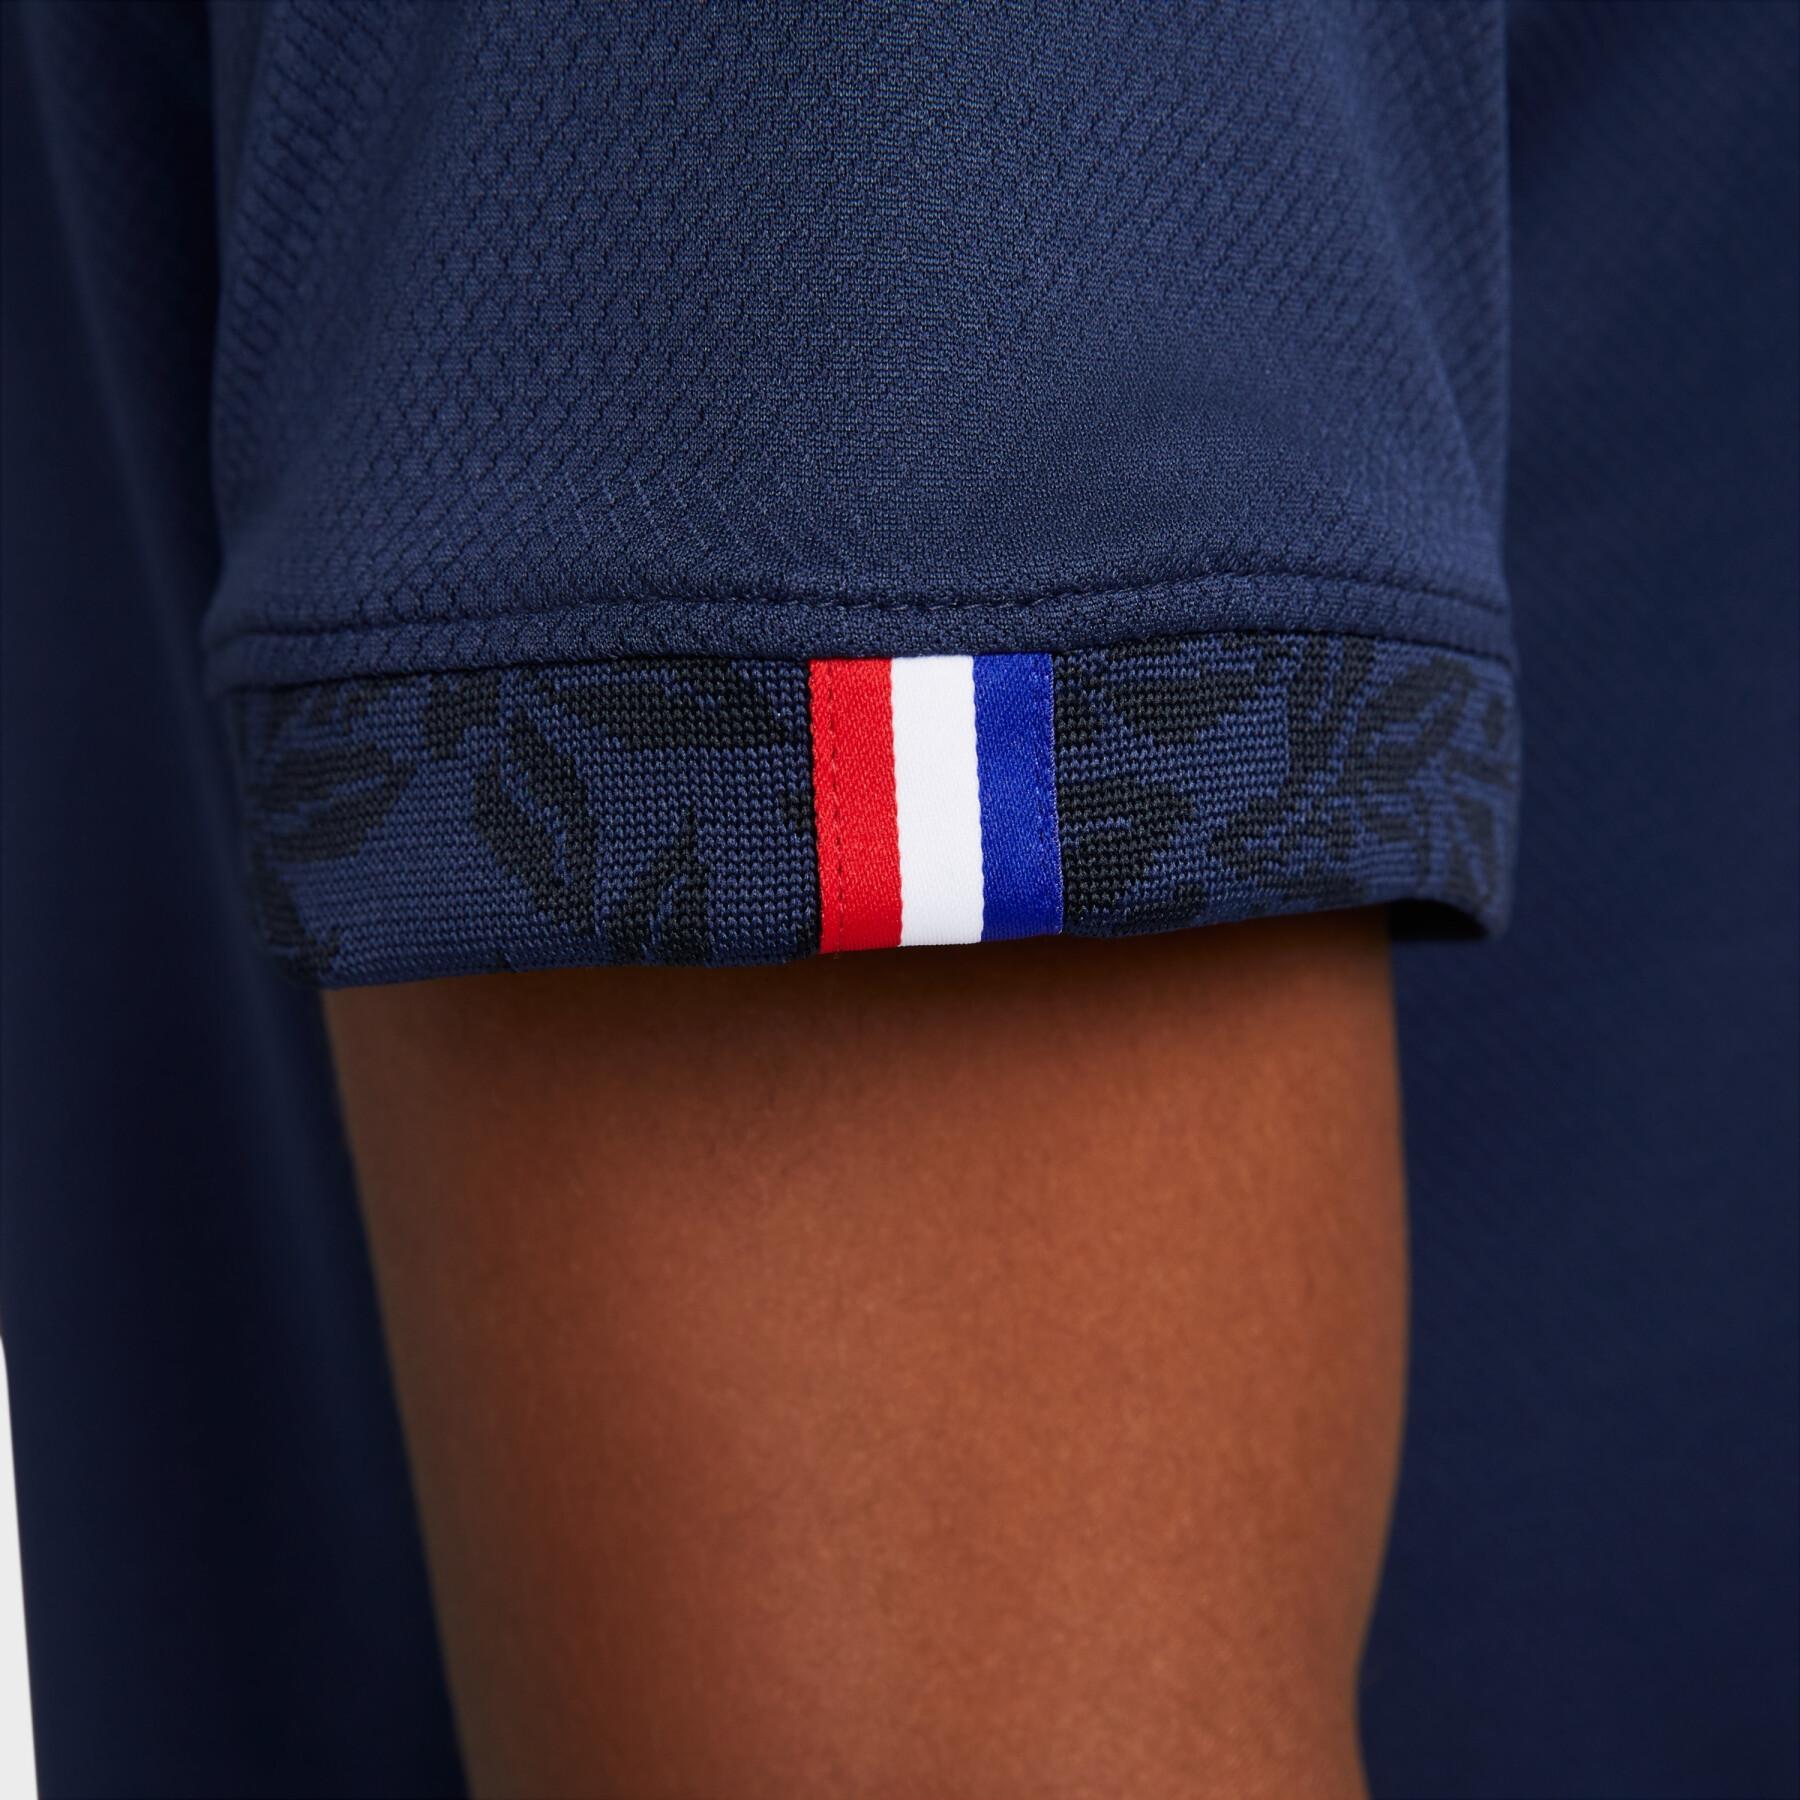 2022 World Cup home jersey France